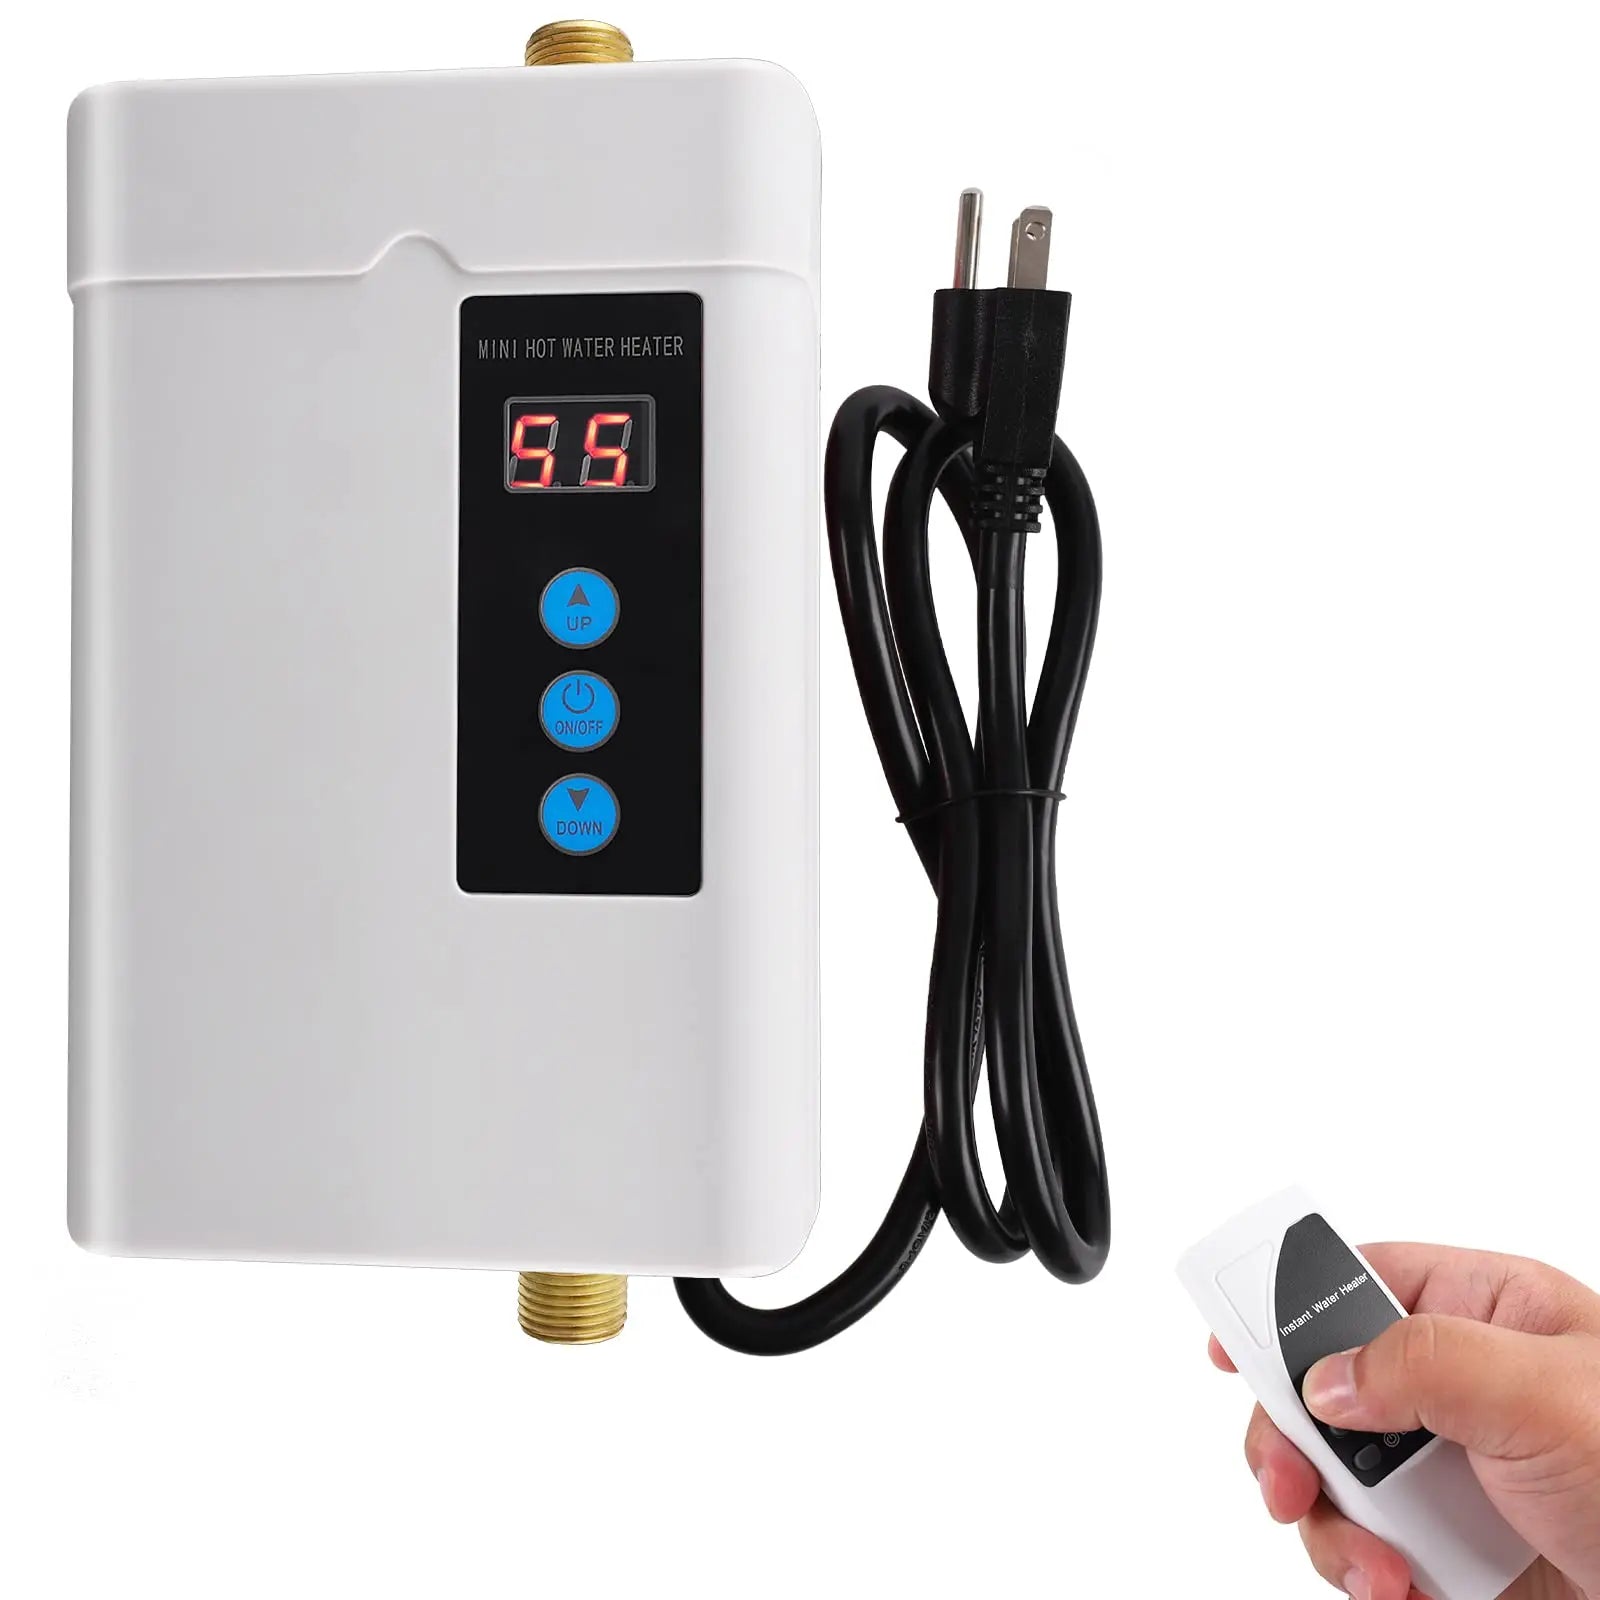 Tankless Water Heater, Mini Electric Instant Hot Water Heater with LED Display, Water Heater with Remote Control